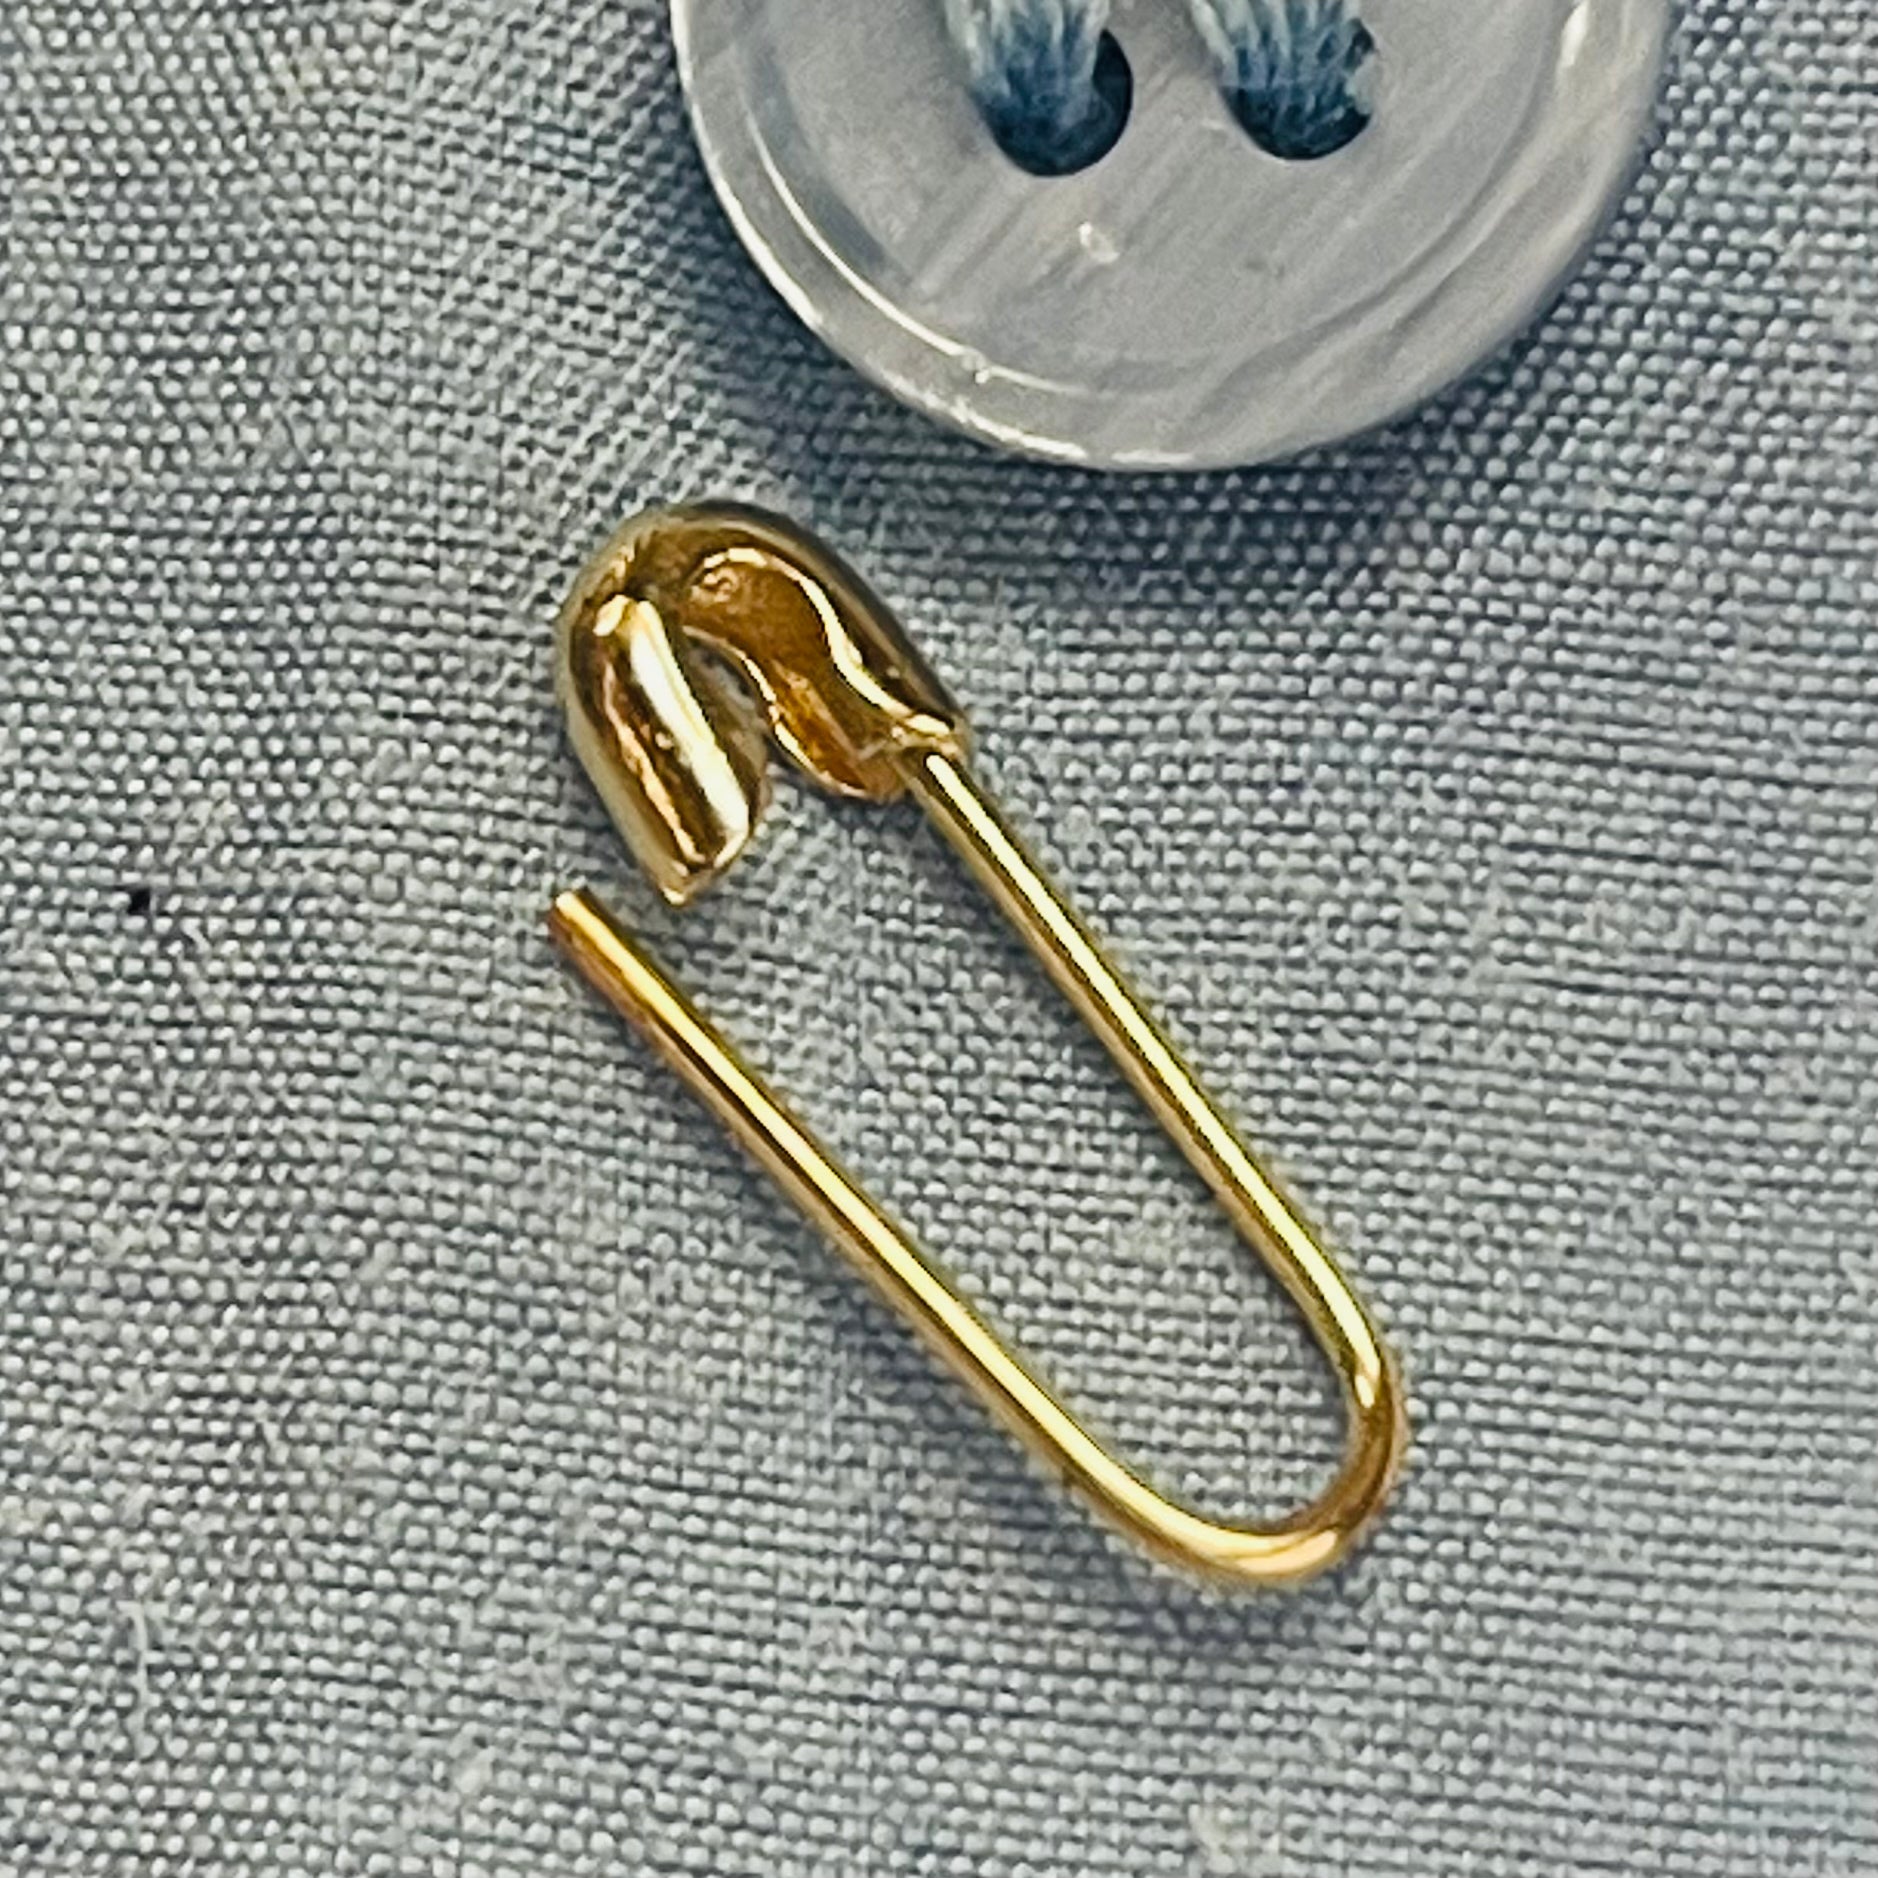 Solid 14K Gold Mini Safety Pin Clasp Connecter